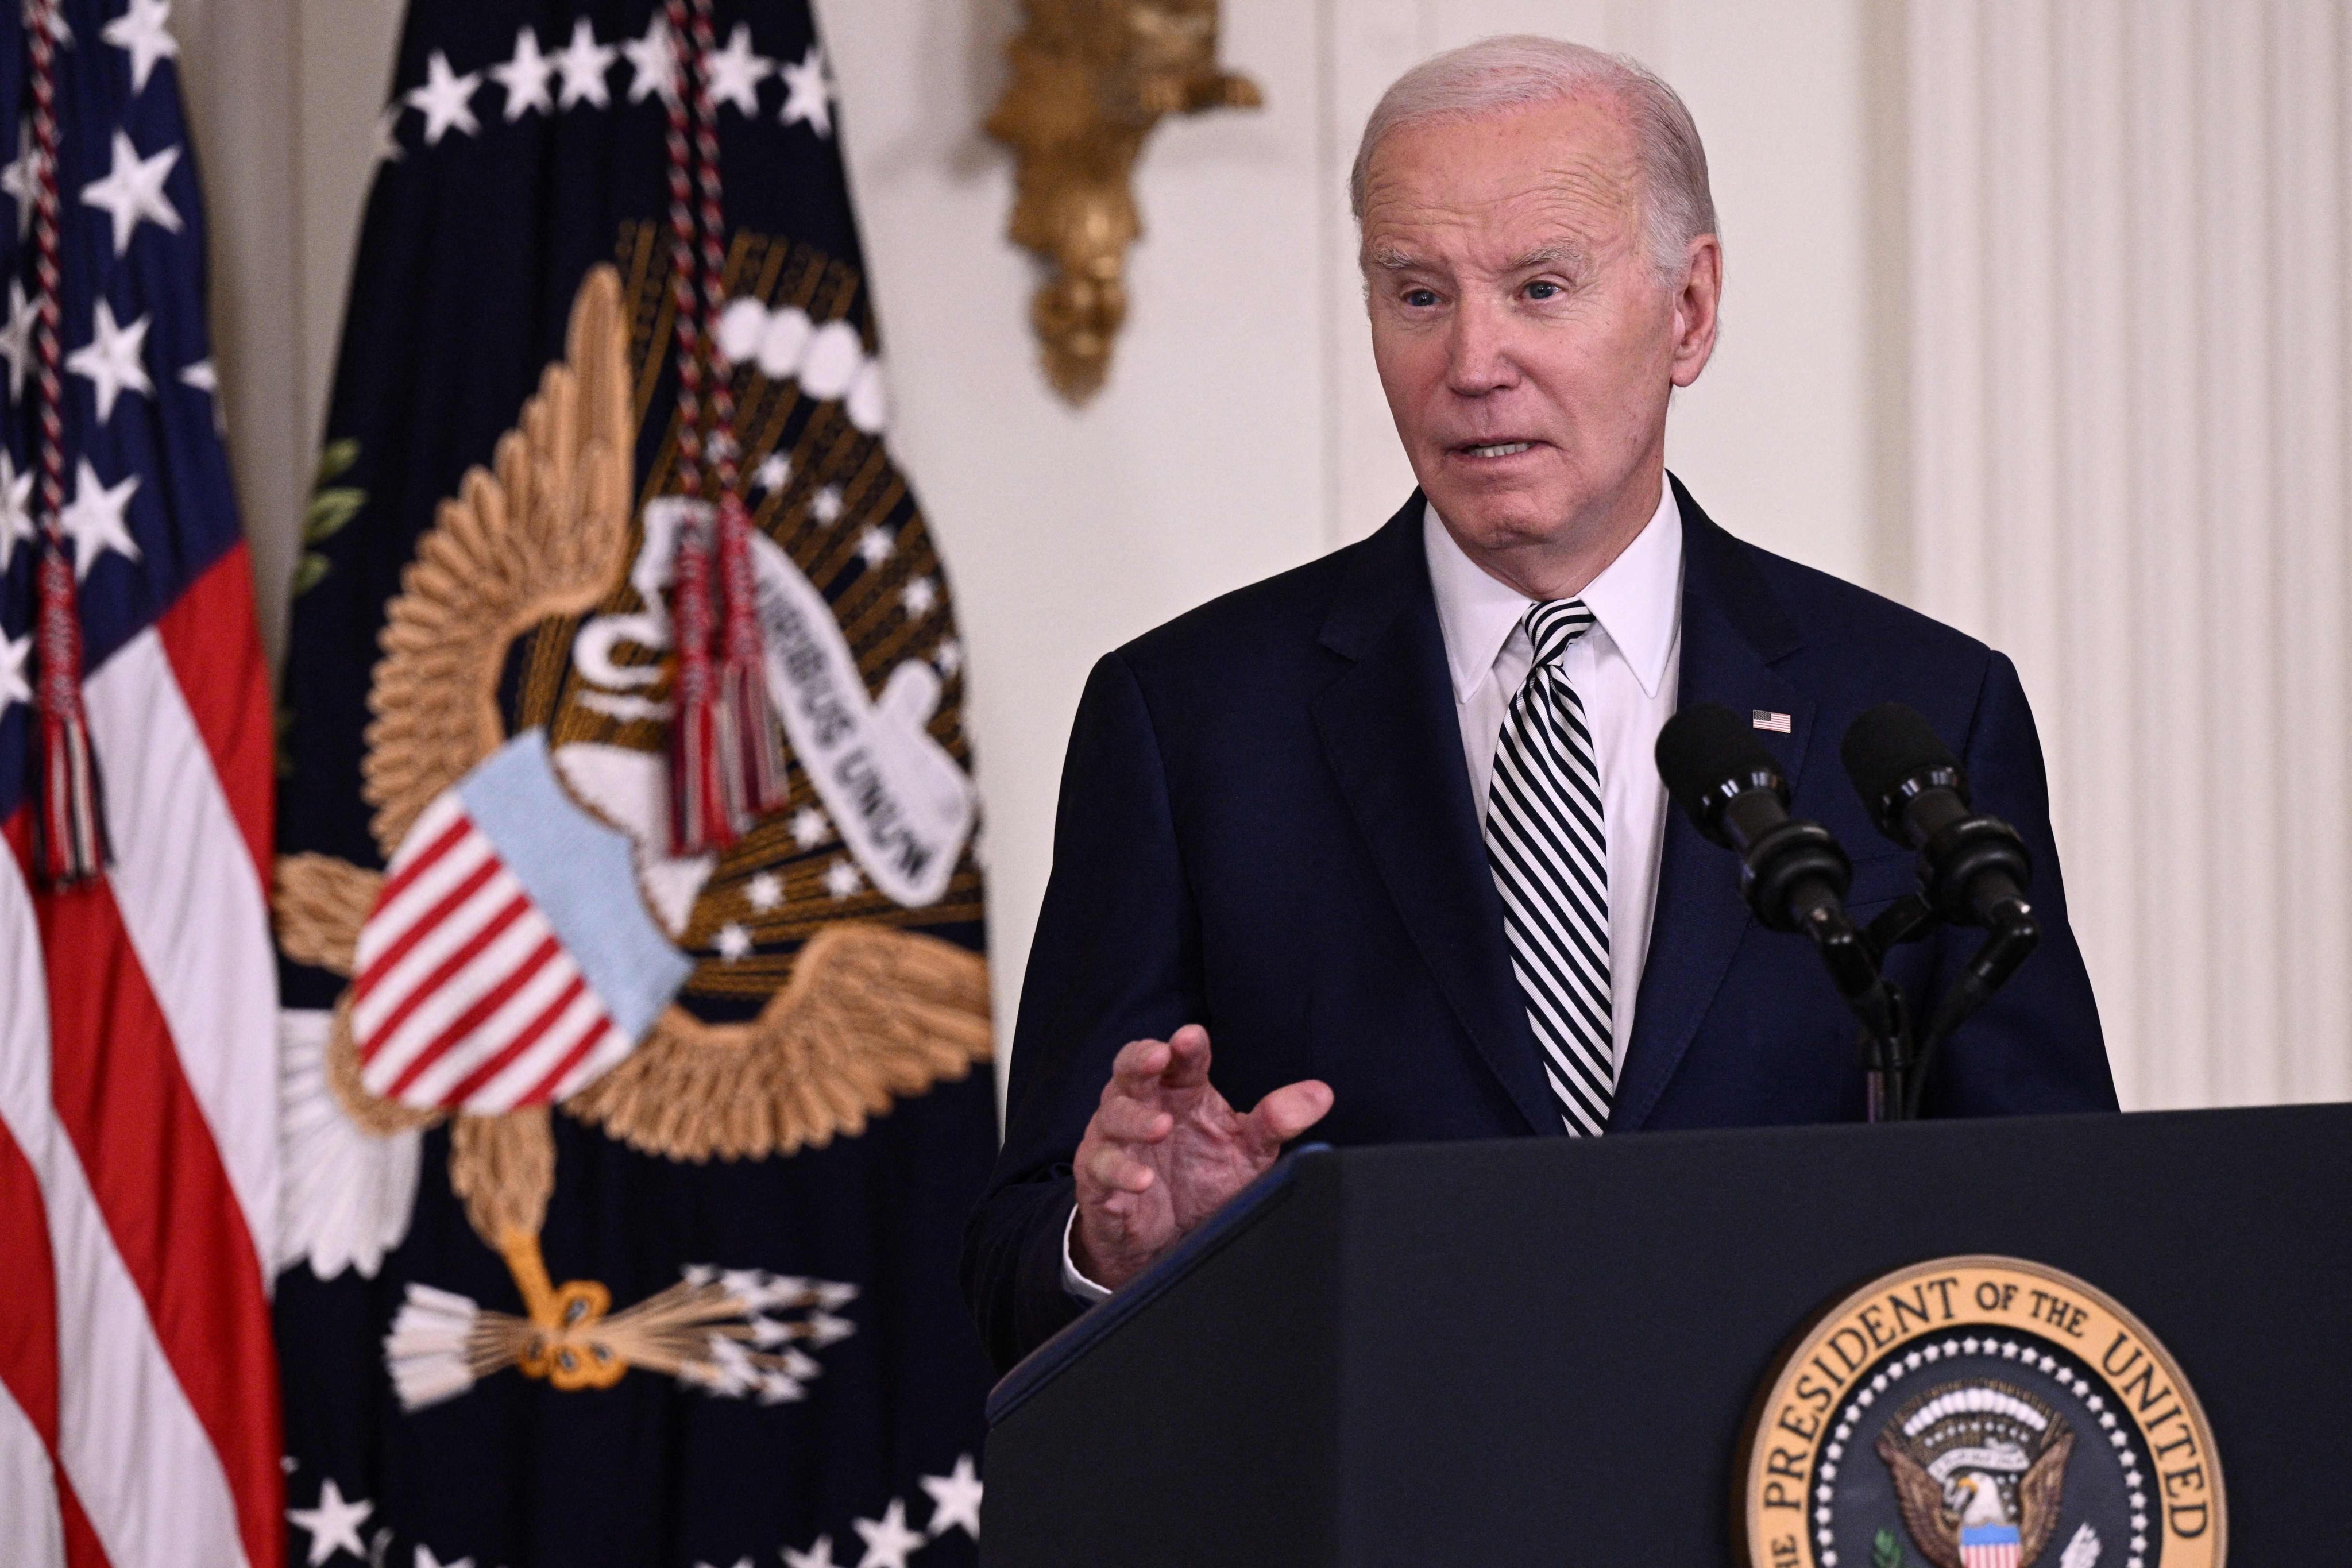 US President Joe Biden delivers remarks on artificial intelligence at the White House in Washington on Monday. Photo: AFP